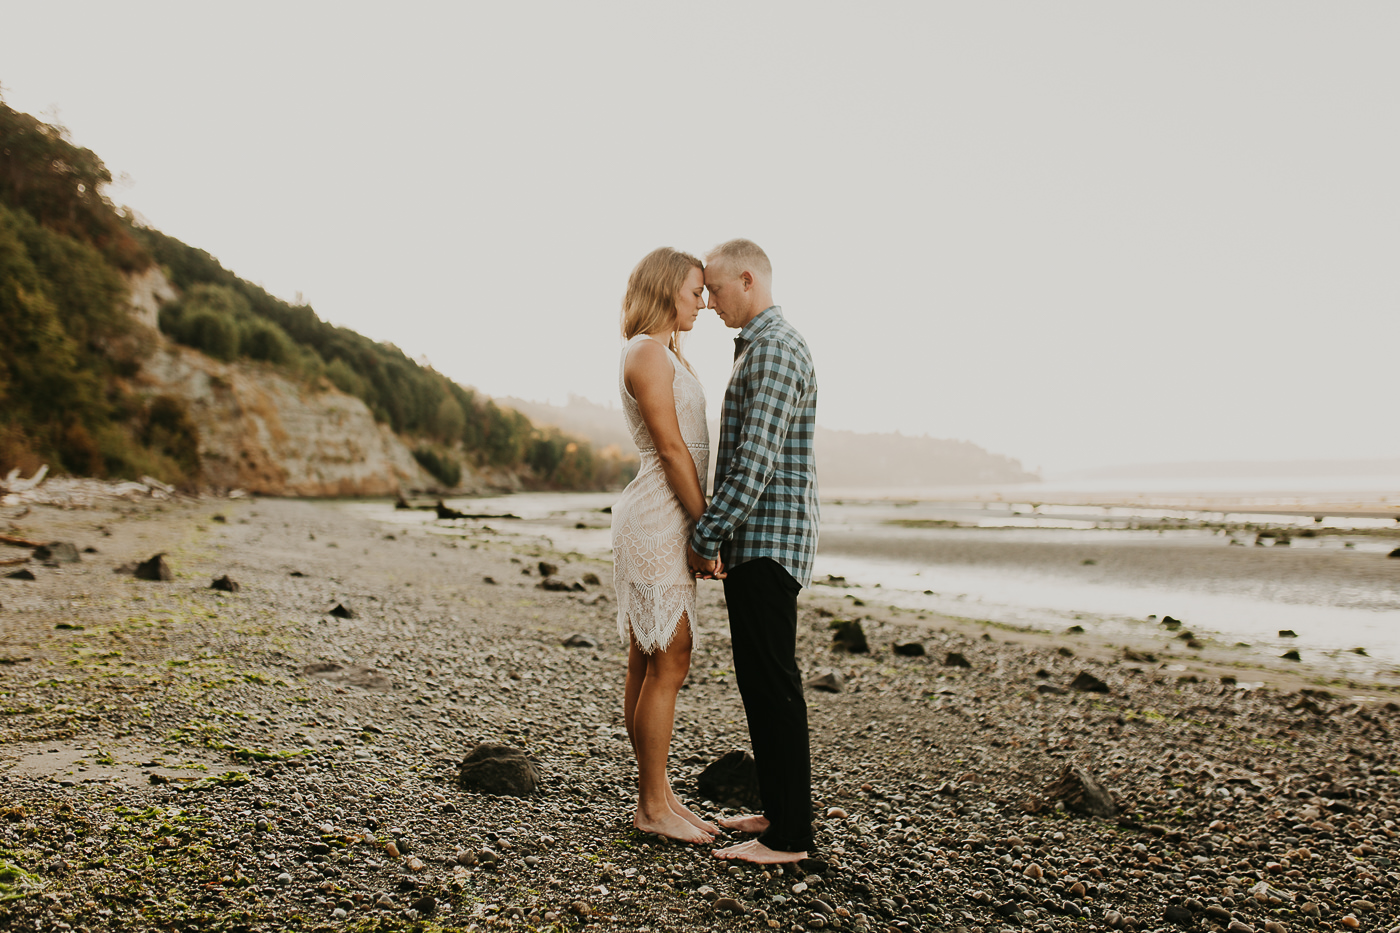  Lauren + Scott - Kamra Fuller Photography - Seattle Wedding Photographer - Seattle Engagement Session - Seattle Elopement Photographer - Seattle Couple's Session - Washington State Wedding Photographer - Couple's Photography - Discovery Park - South